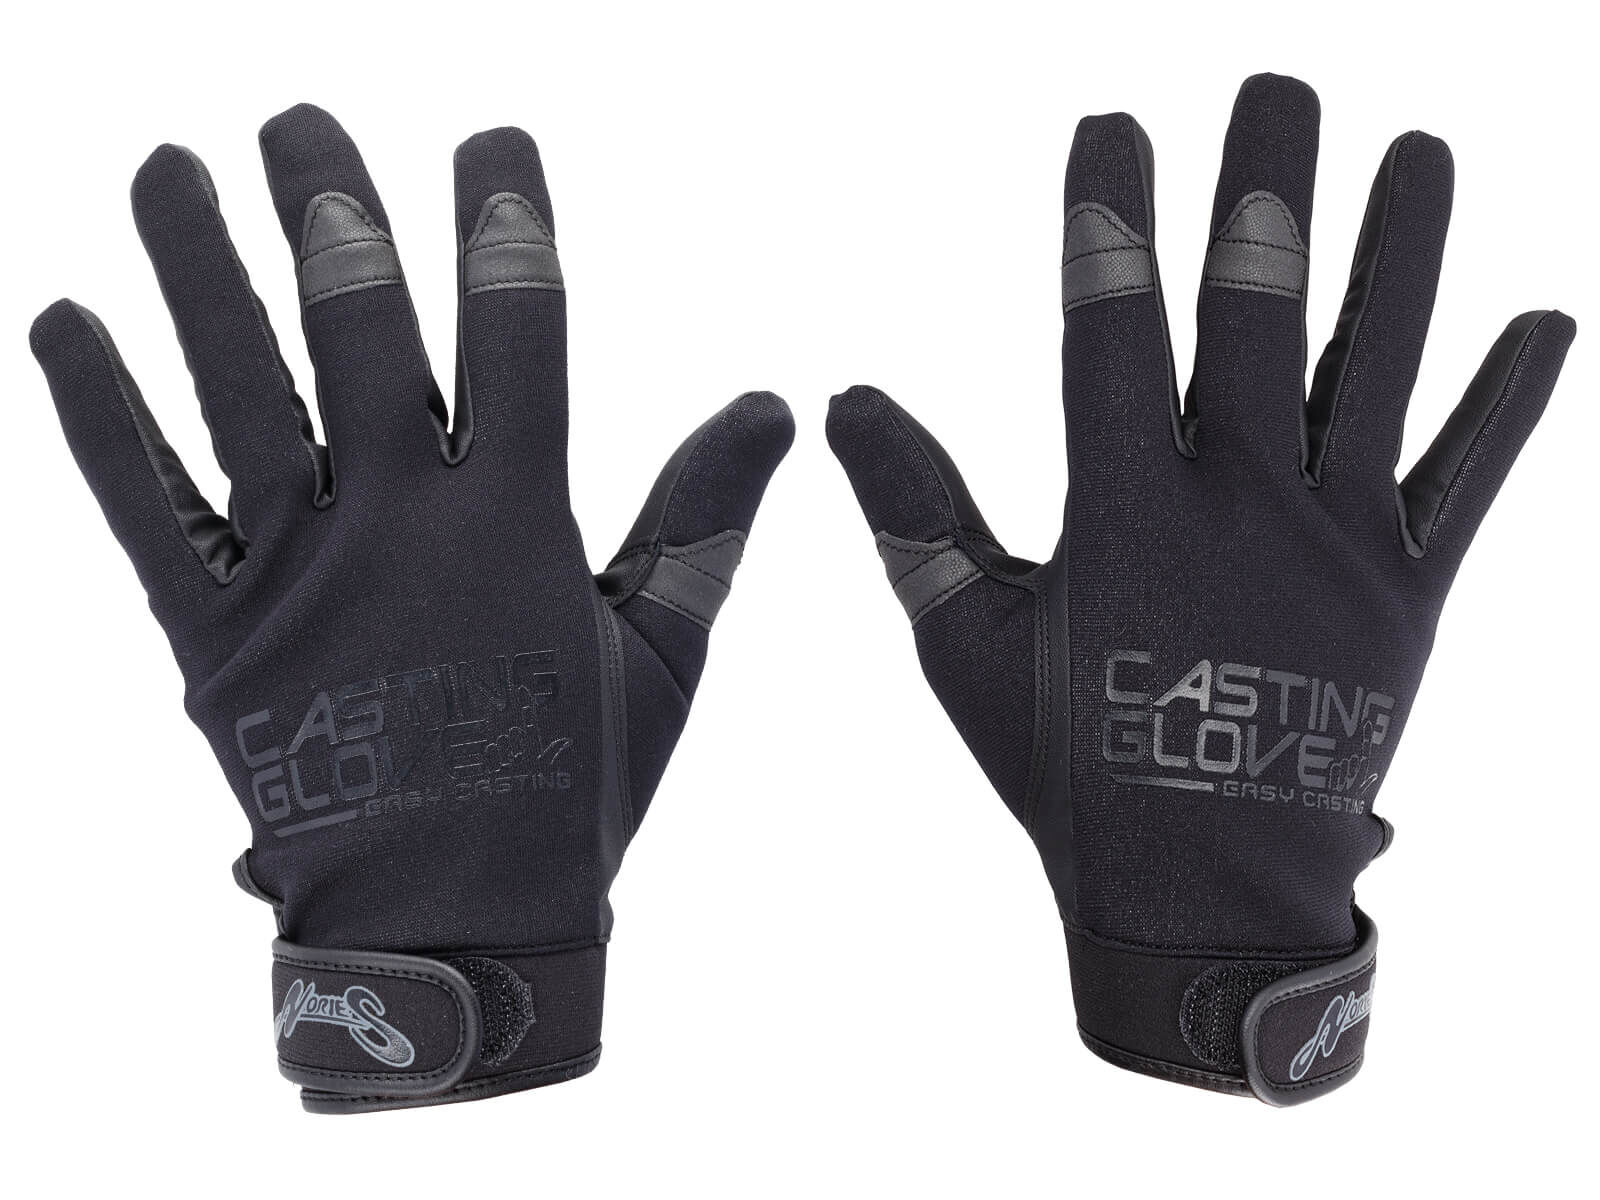 NORIES Casting Gloves NS-03